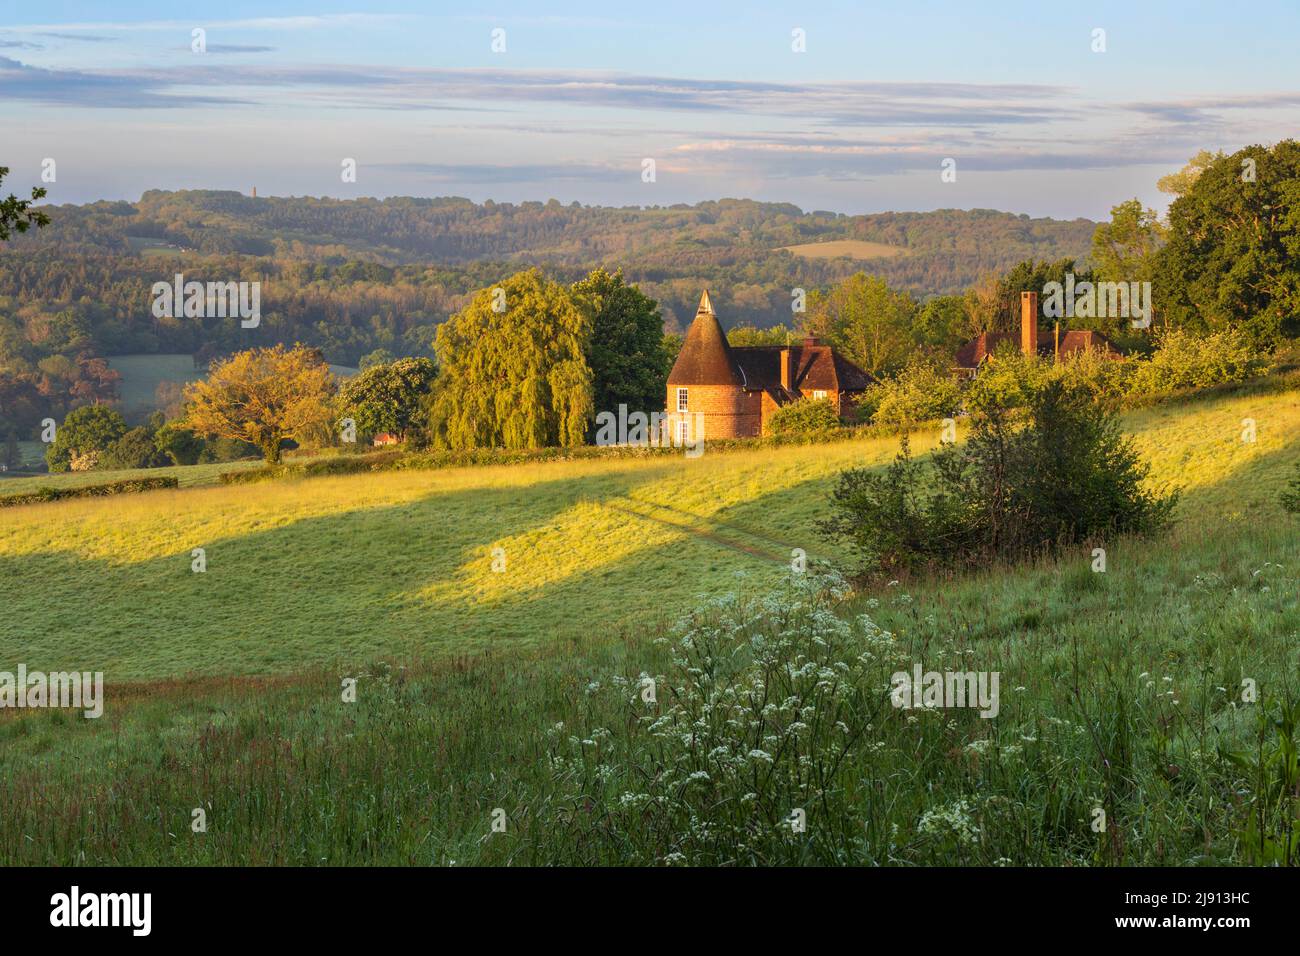 Former oast house in morning sunlight set in High Weald landscape viewed from public footpath, Burwash, East Sussex, England, United Kingdom, Europe Stock Photo